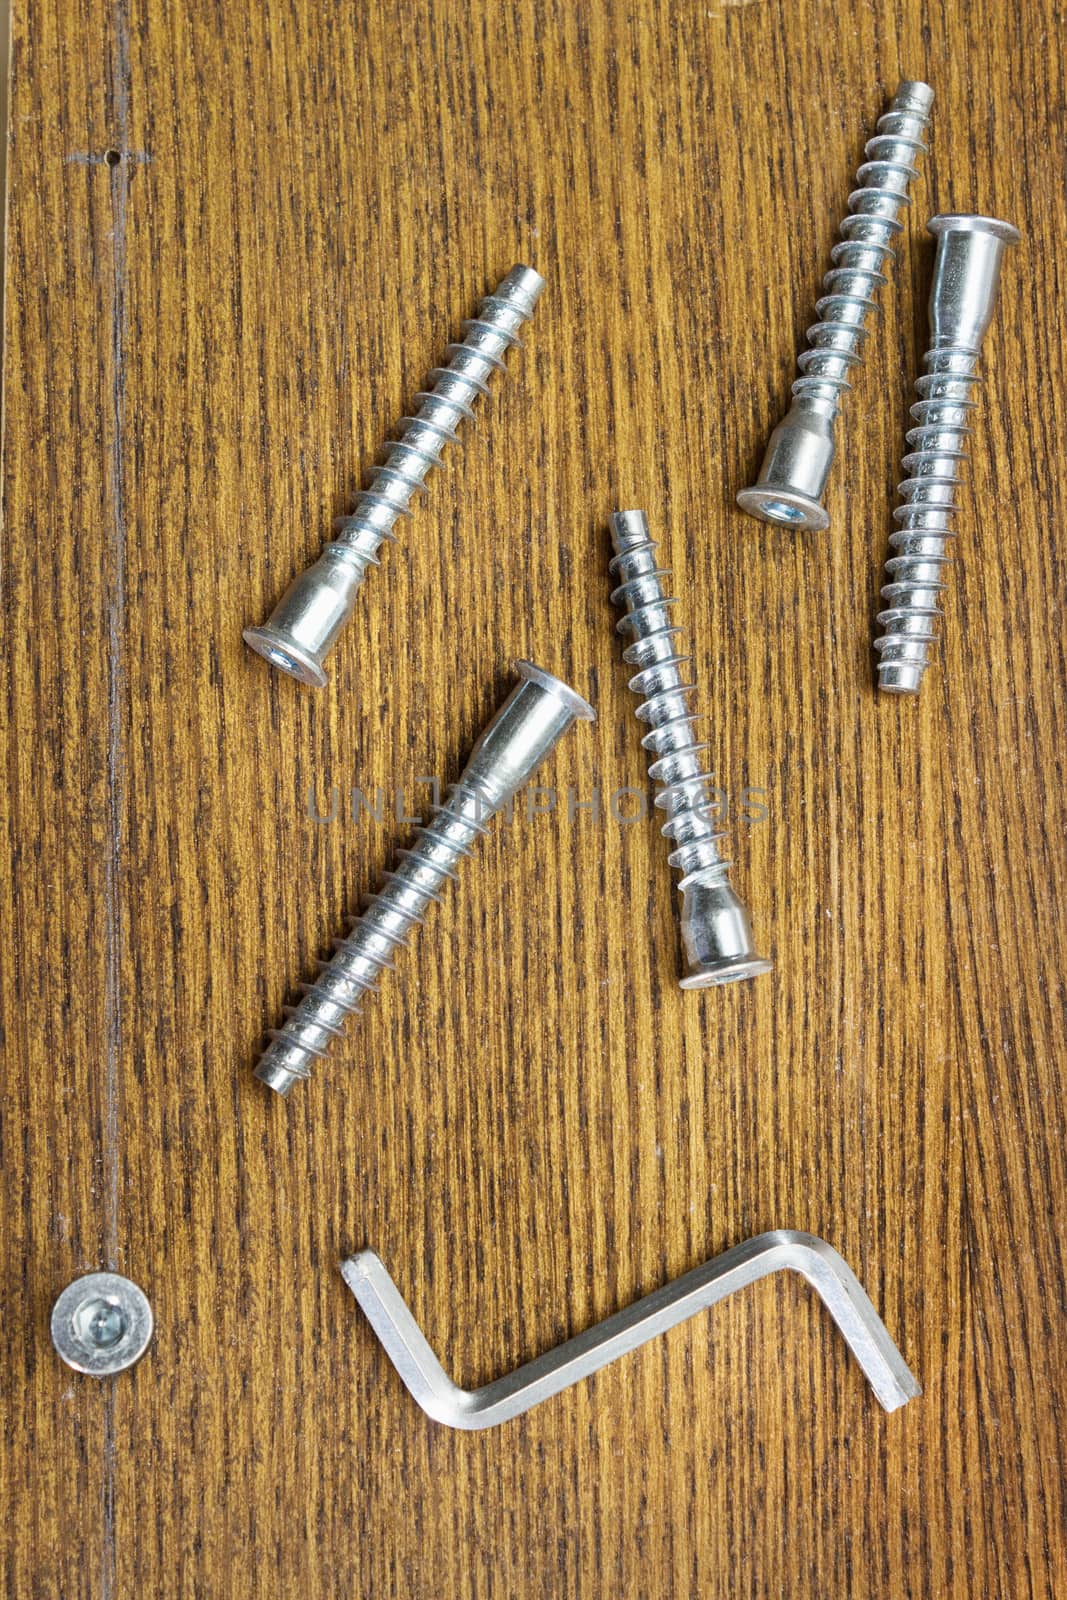 Screws for assembling furniture and simple tool on table